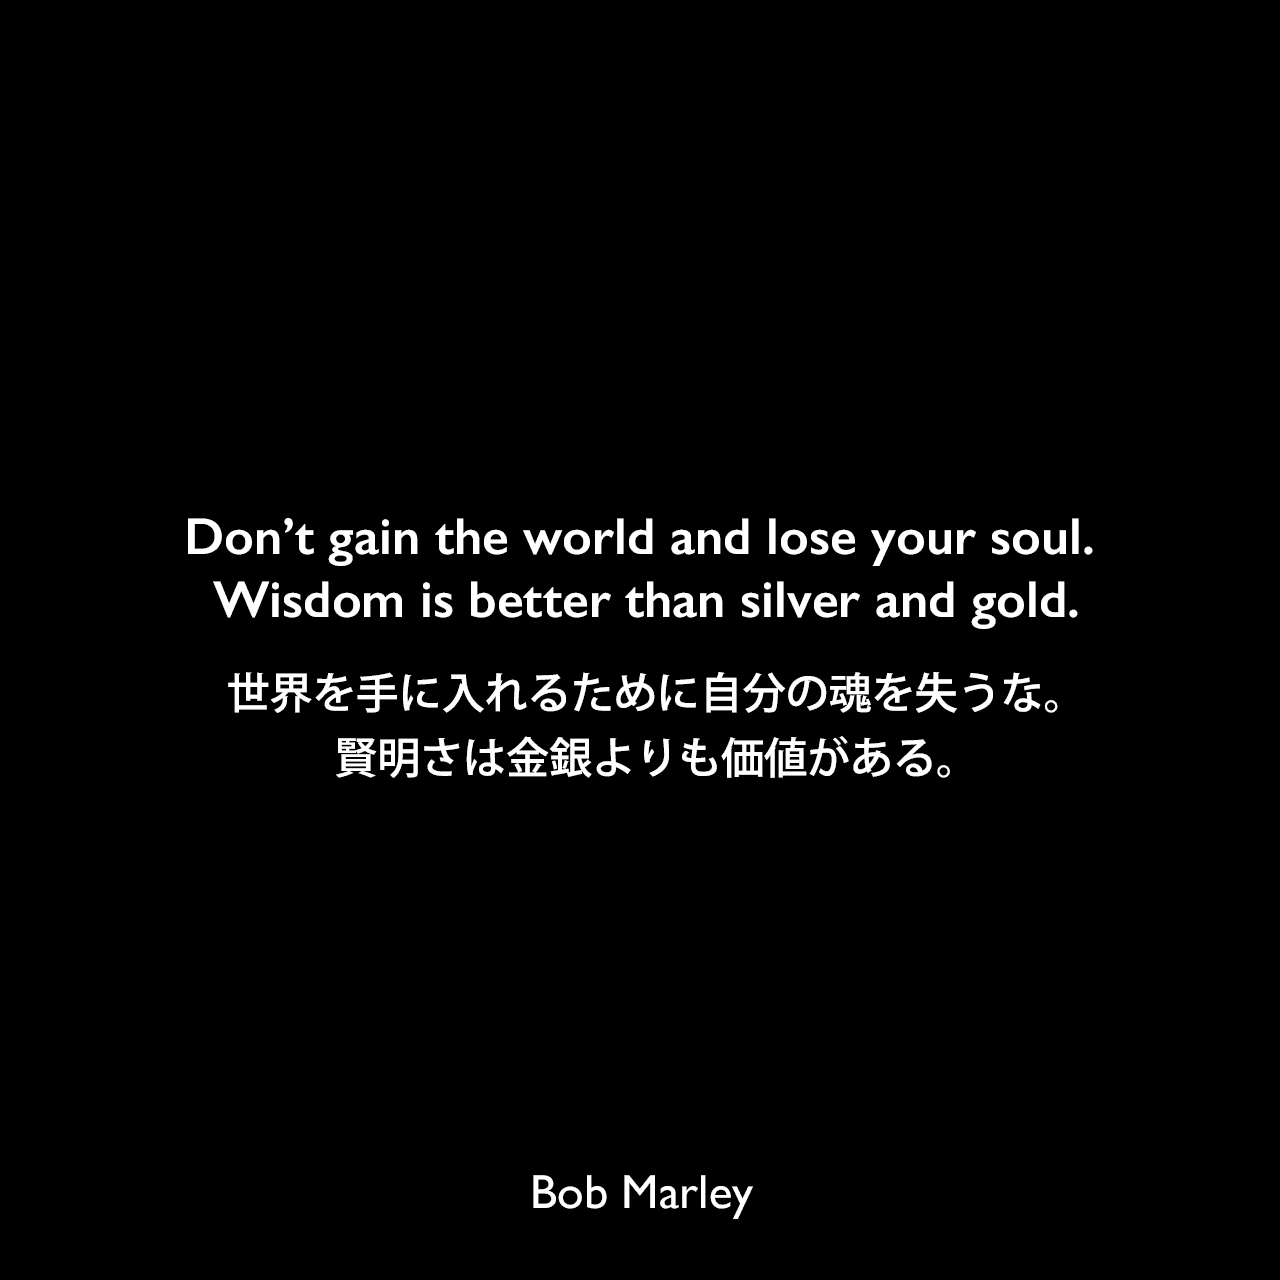 Don’t gain the world and lose your soul. Wisdom is better than silver and gold.世界を手に入れるために自分の魂を失うな。賢明さは金銀よりも価値がある。Bob Marley